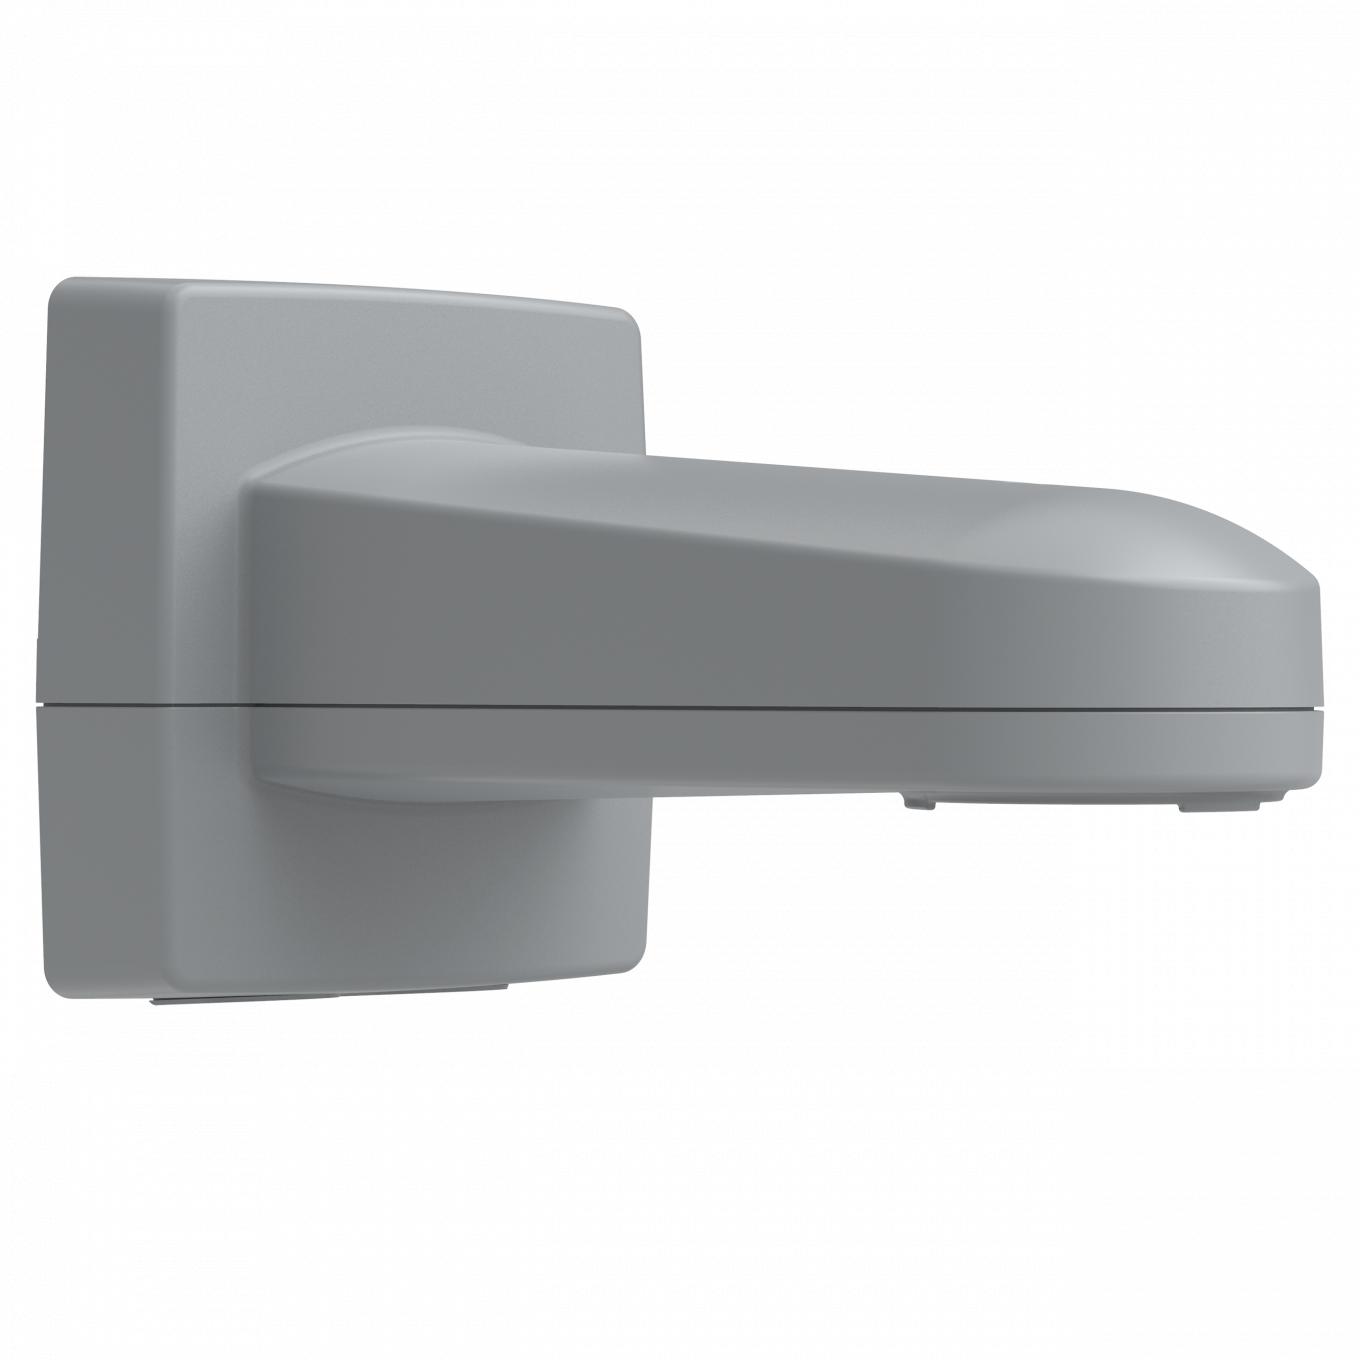 AXIS T91G61 Wall Mount Grey dall'angolo sinistro